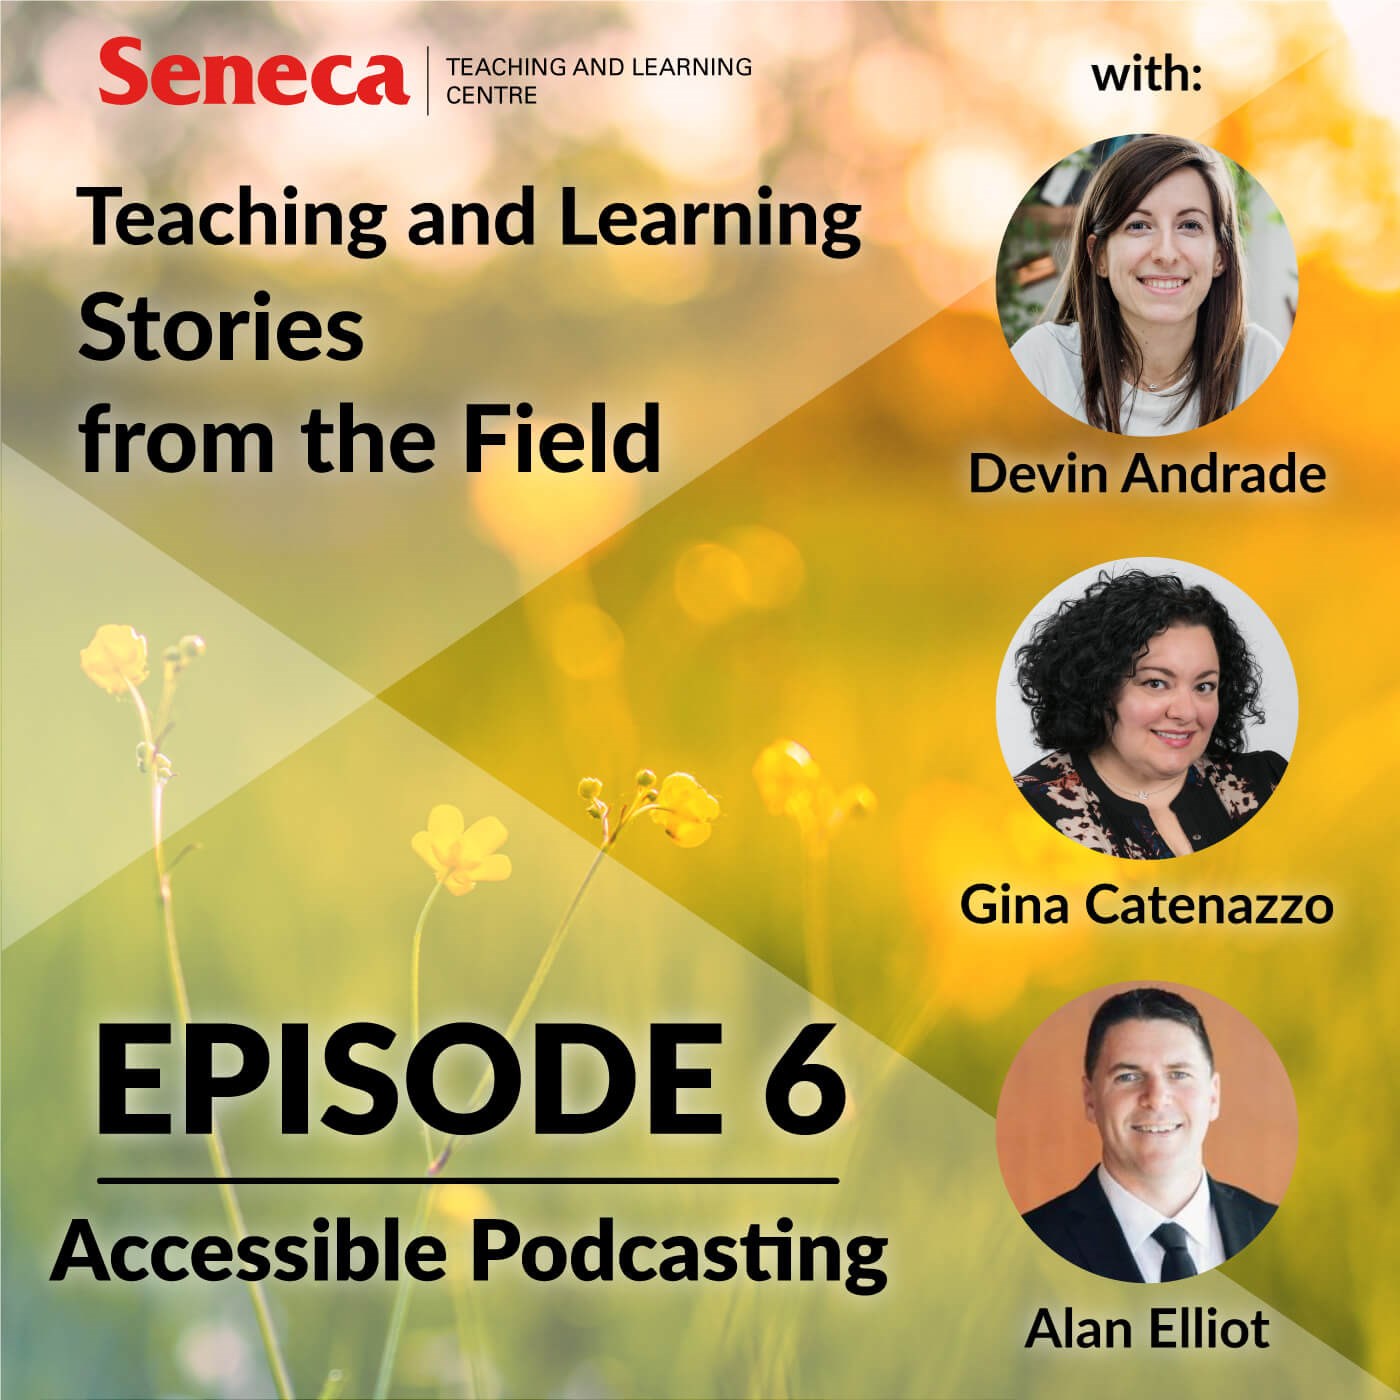 Episode 6 of the Teaching and Learning Stores podcast is called https://employees.senecacollege.ca/spaces/39/the-teaching-learning-centre/articles/press-release/14616/accessible-podcasting with Gina Catenazzo, Devin Andrade, and Alan Elliot